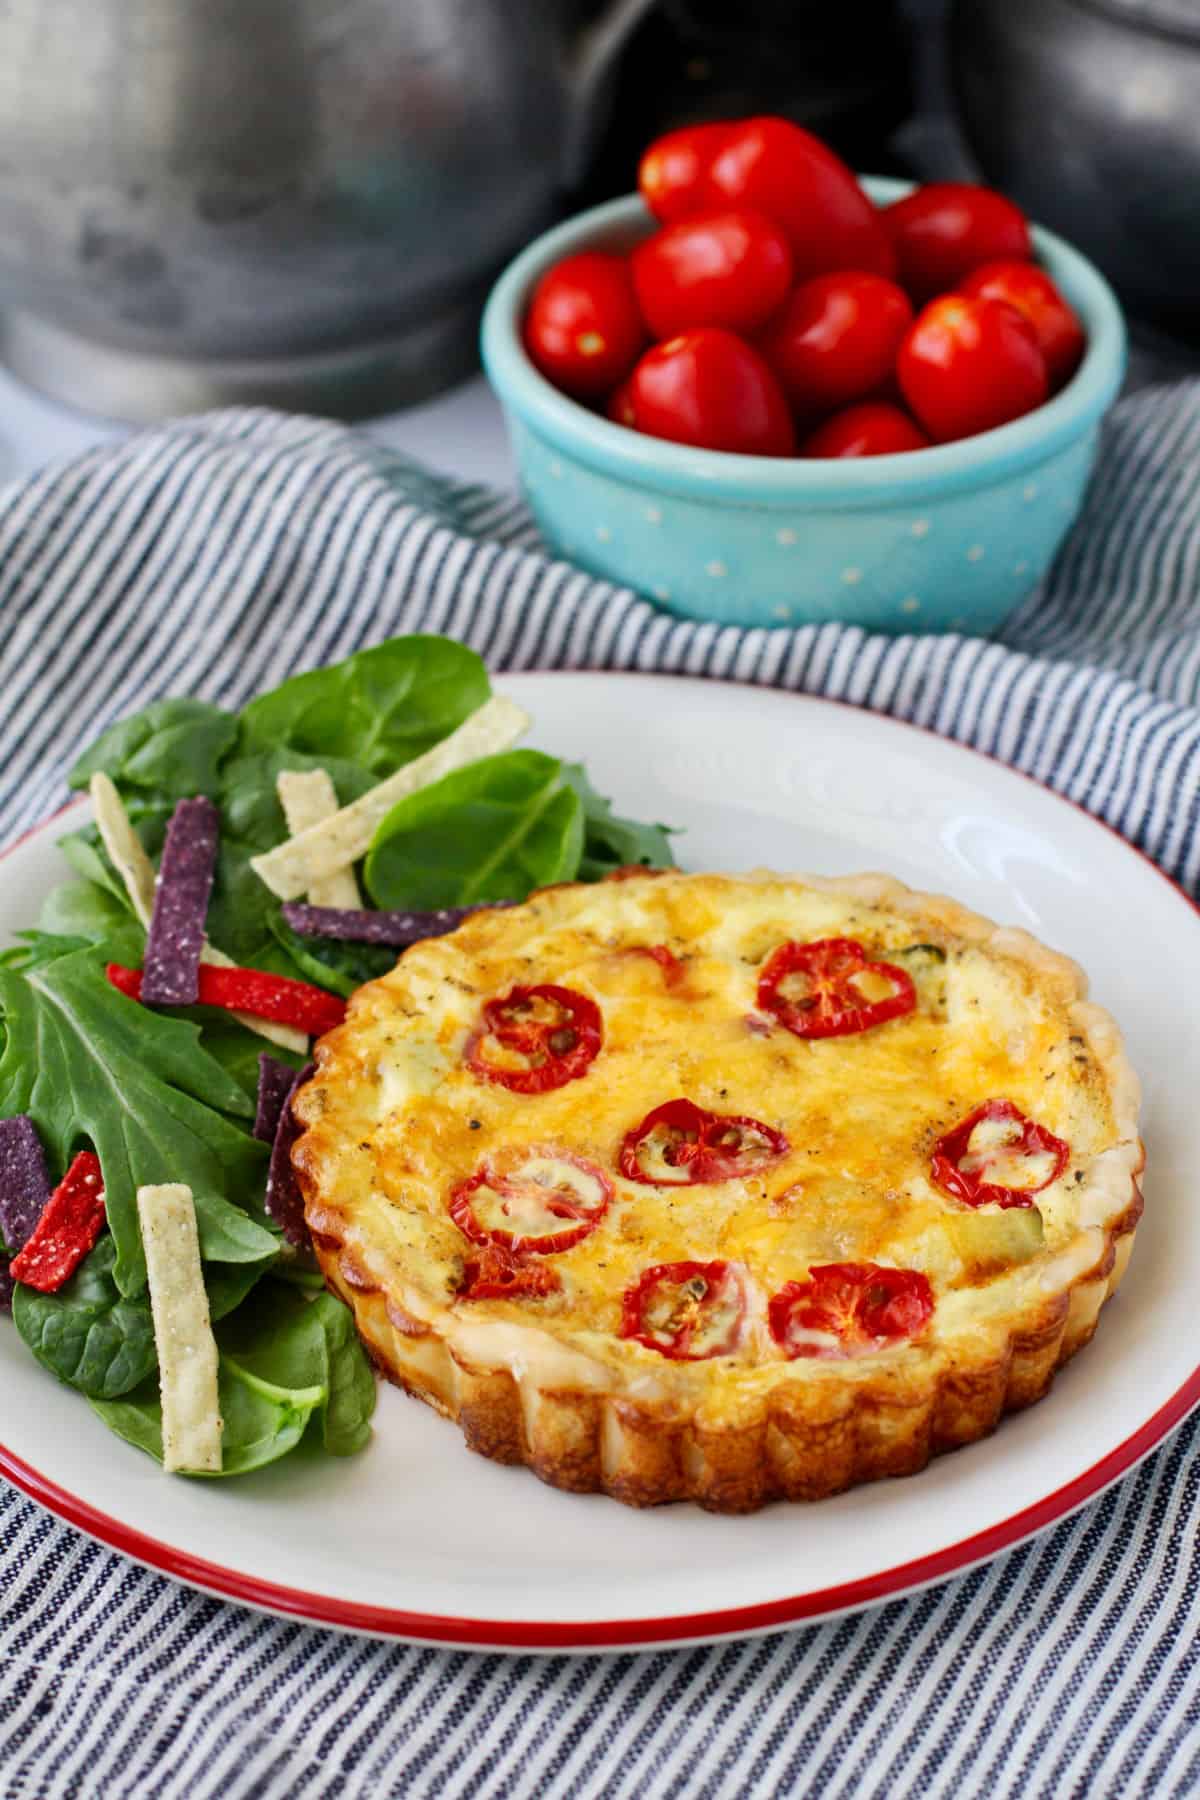 Vegetable and Cheddar Tarts with tomatoes and a salad.